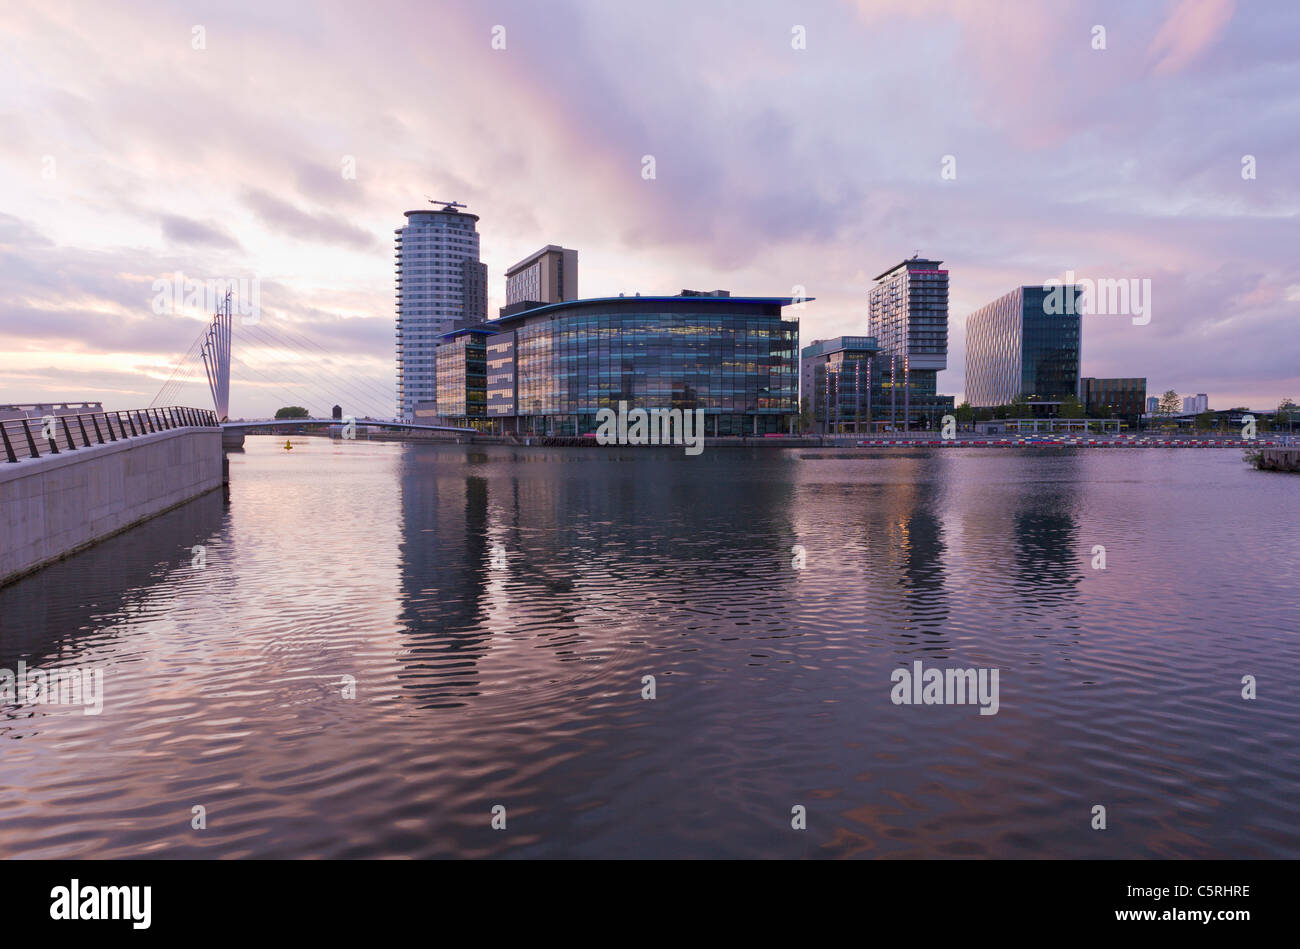 Media City at night, Salford Quays, Manchester, England Stock Photo